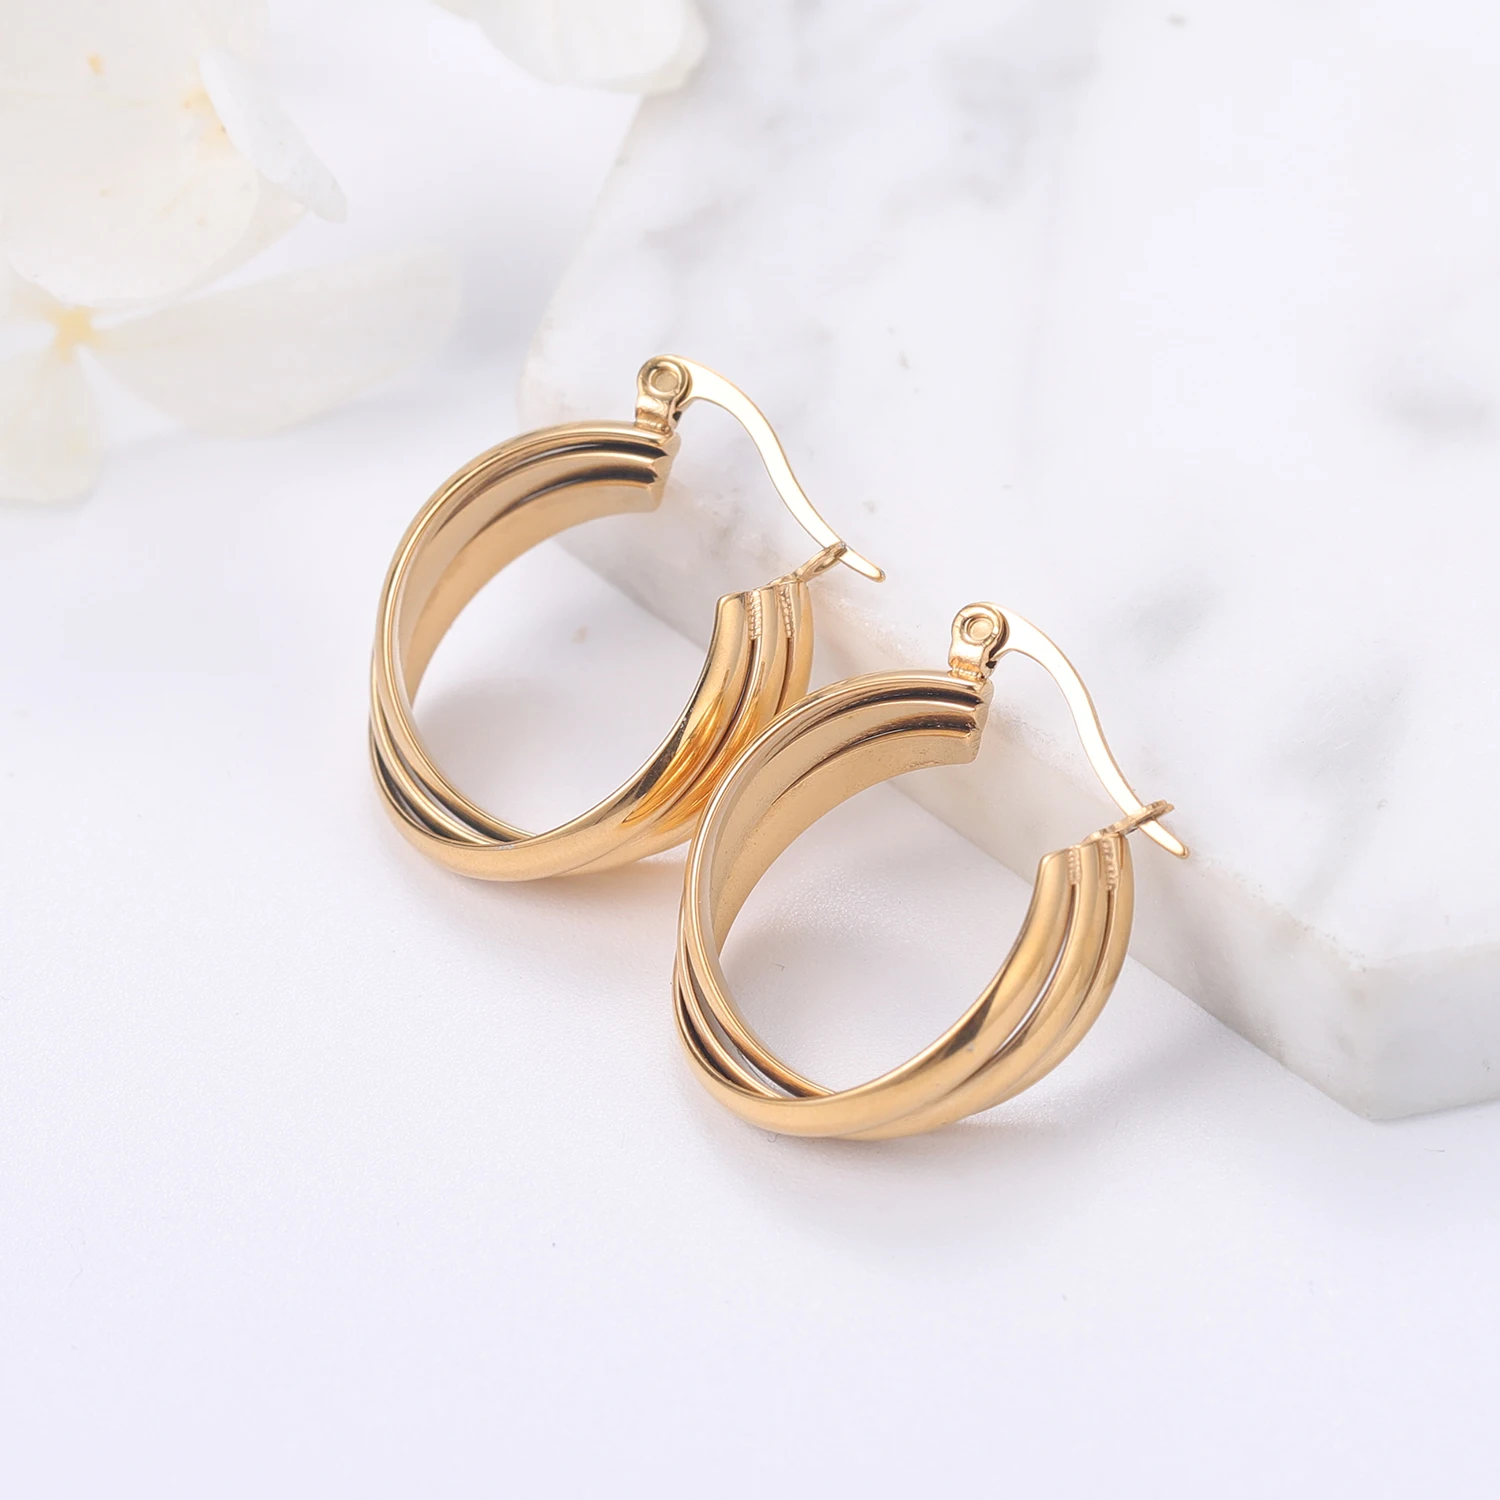 

2021 New Jewelry Retro Metallic Gold Multi-layer Small Circle Pendant Earrings Fashion Wedding Party Unusual Earrings for Woman